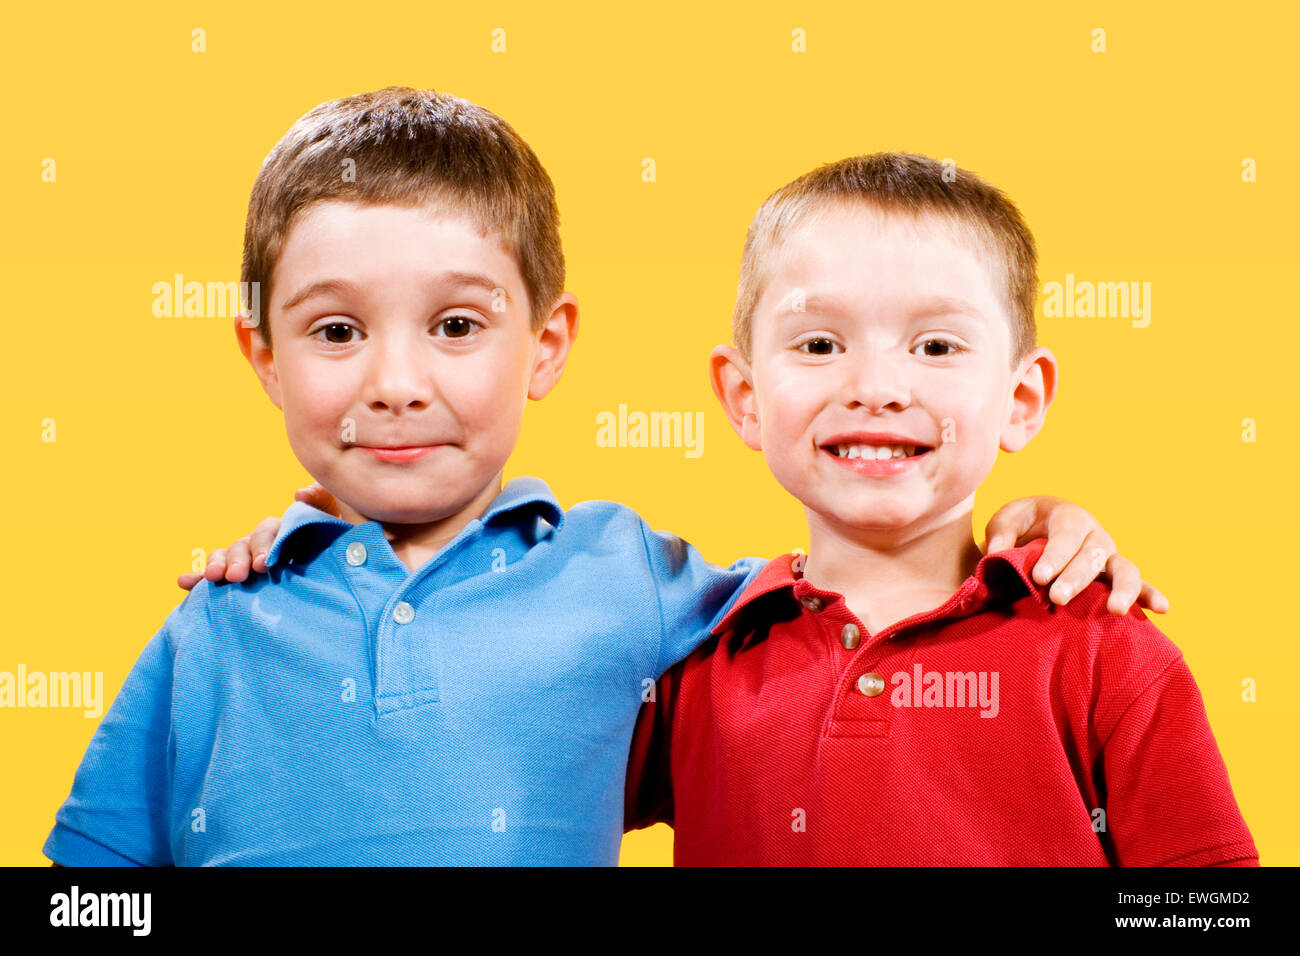 Stock photo of two children over yellow background Stock Photo